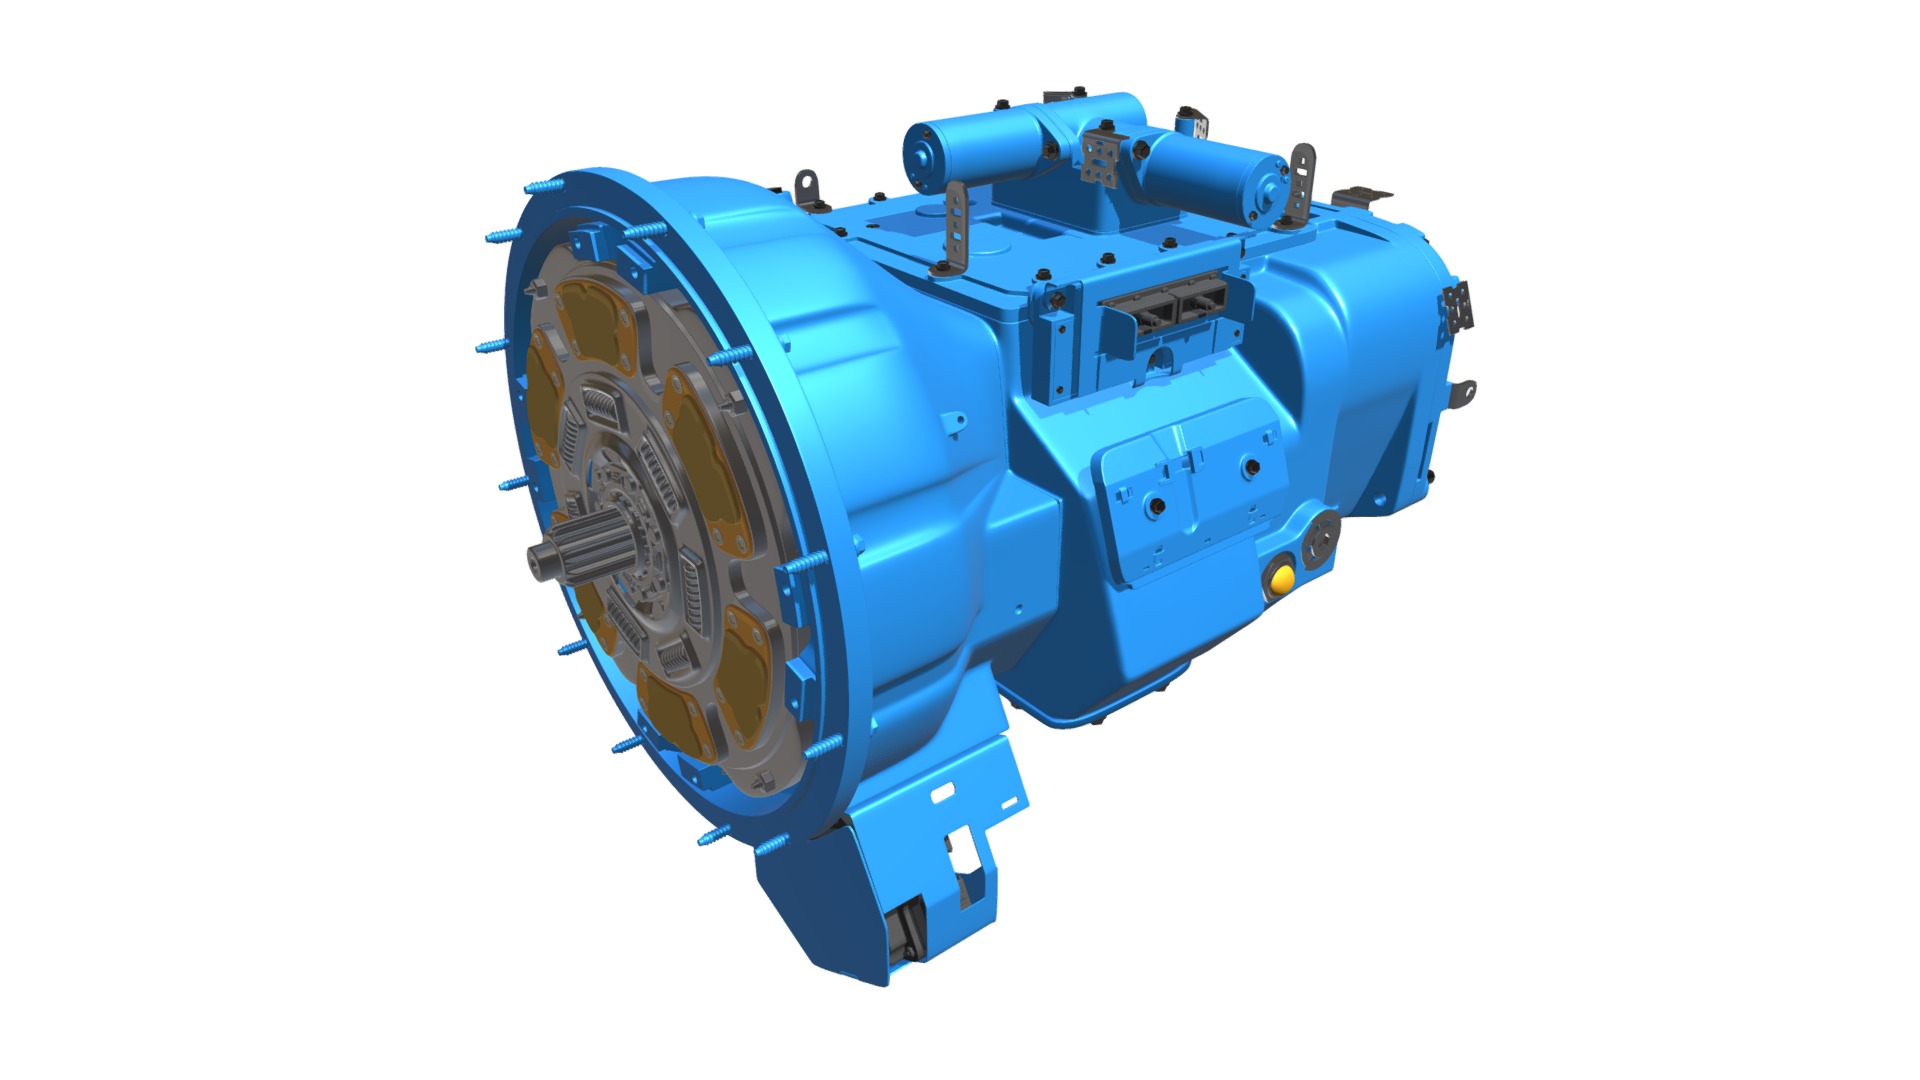 3D model Transmission - This is a 3D model of the Transmission. The 3D model is about a blue machine with a yellow center.